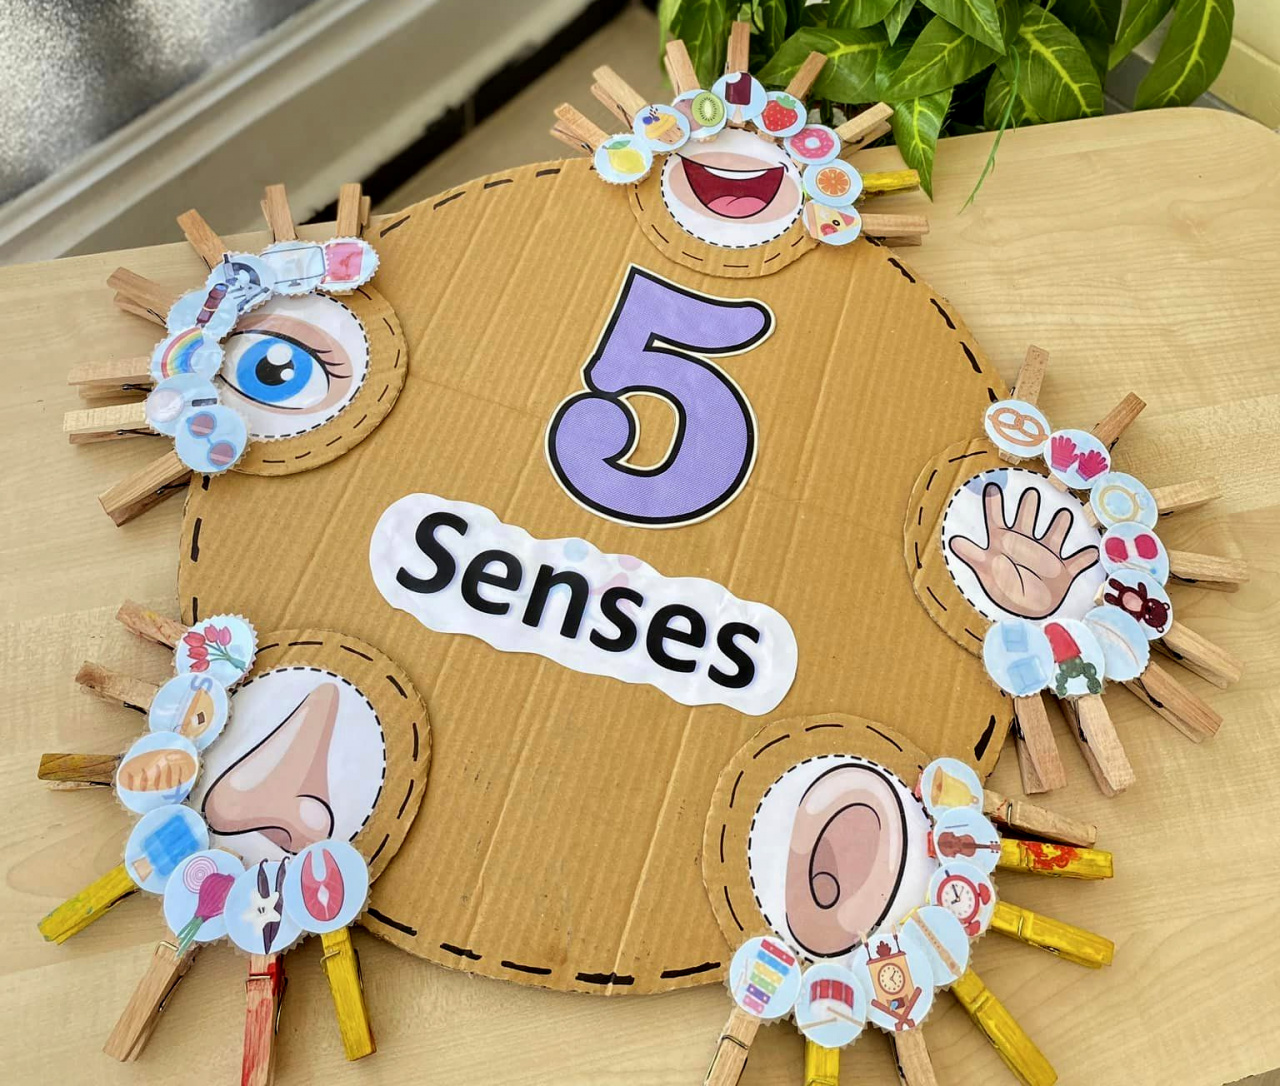 5 Senses Sorting Game with Clothespins